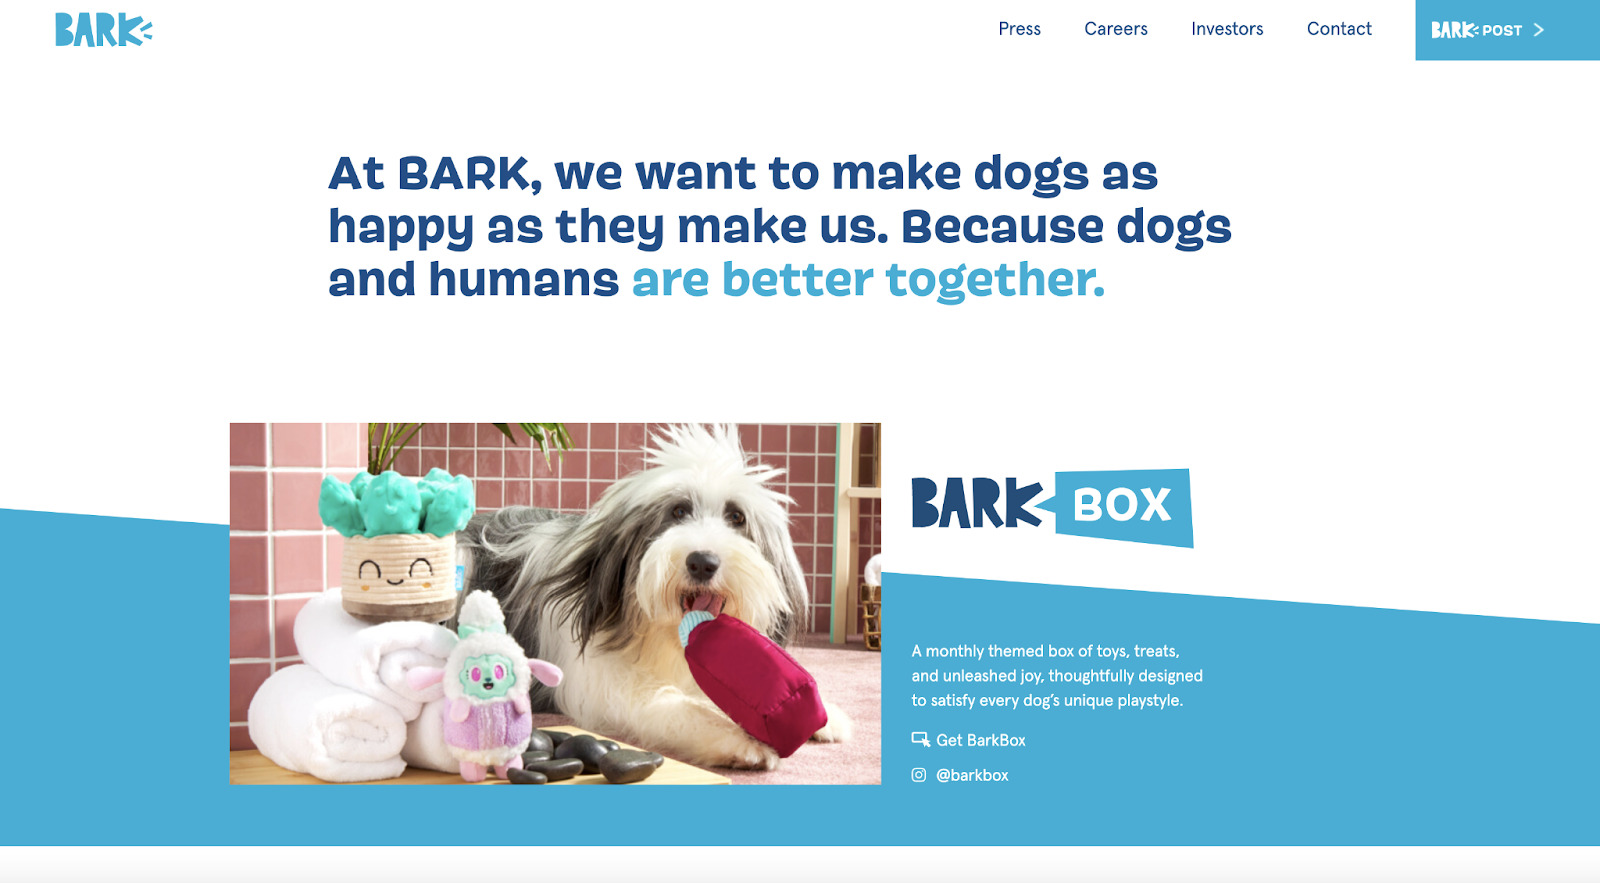 BarkBox’s About Us page is inviting and engaging.